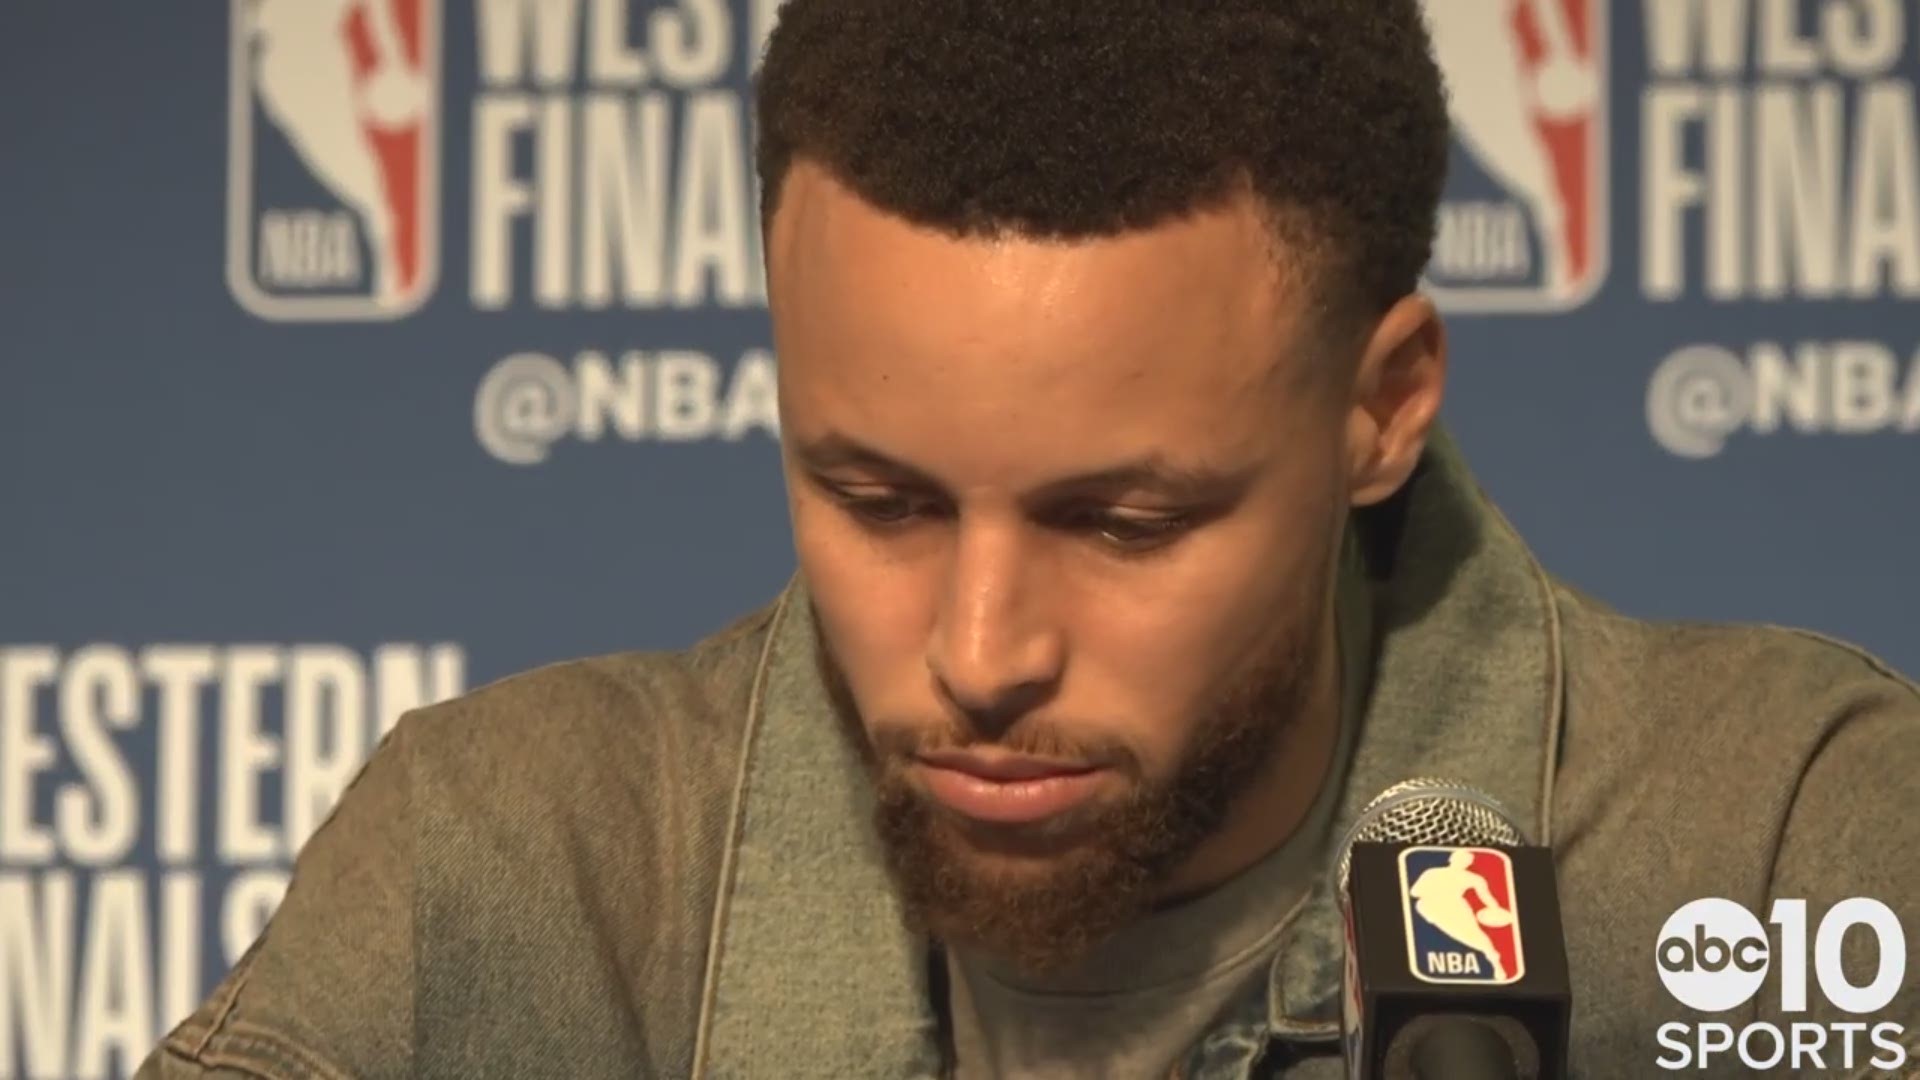 Warriors point guard Stephen Curry talks about Tuesday's 116-94 victory in Game 1 over the Portland Trail Blazers, his 36-point performance which included an NBA postseason record-tying nine three-pointers, and facing his brother Seth Curry in the Western Conference Finals.